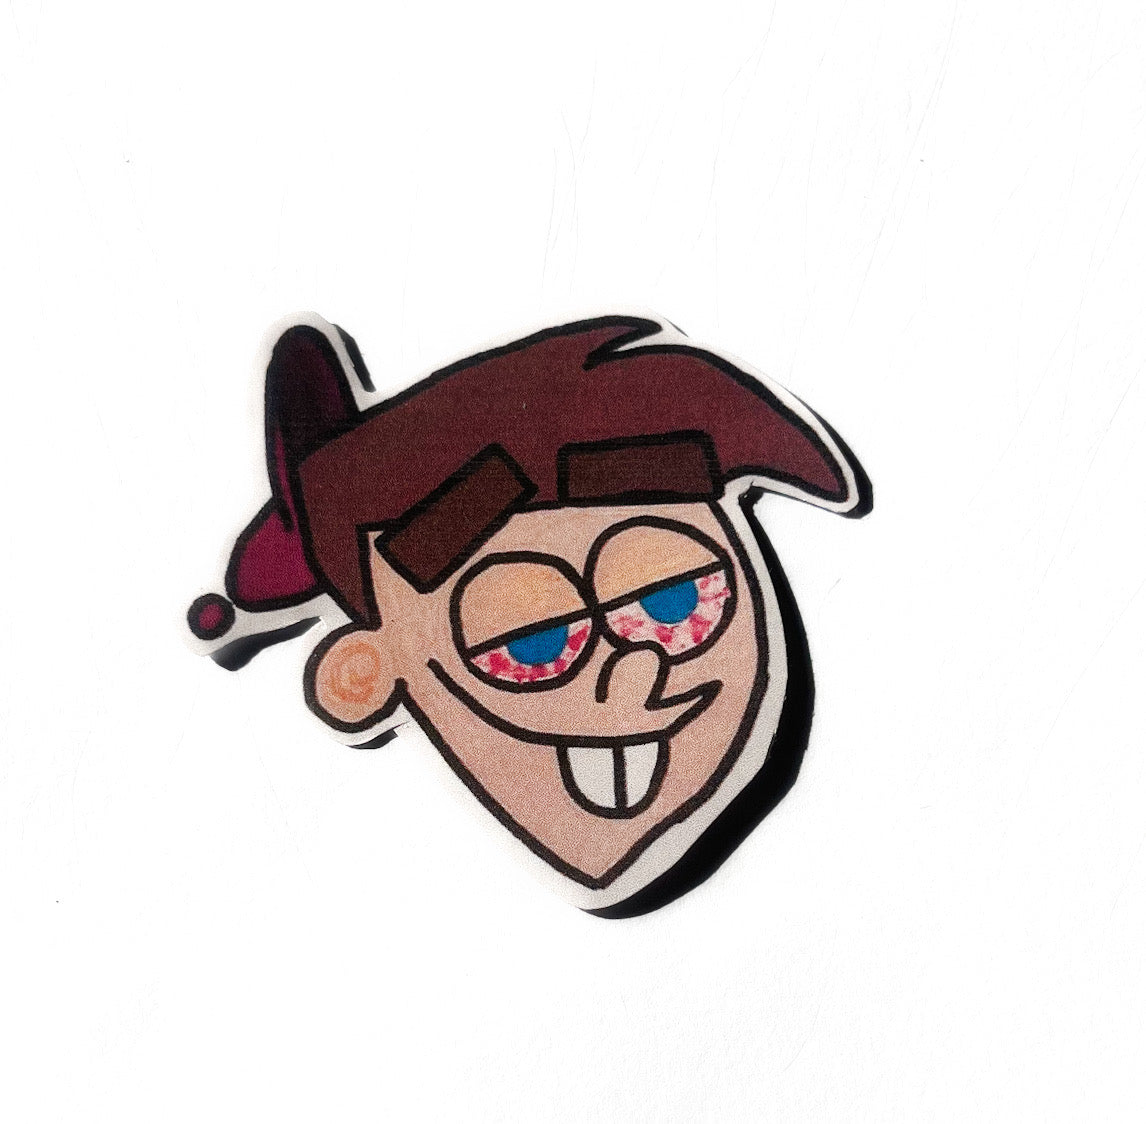 Fairly Odd Parents stickers